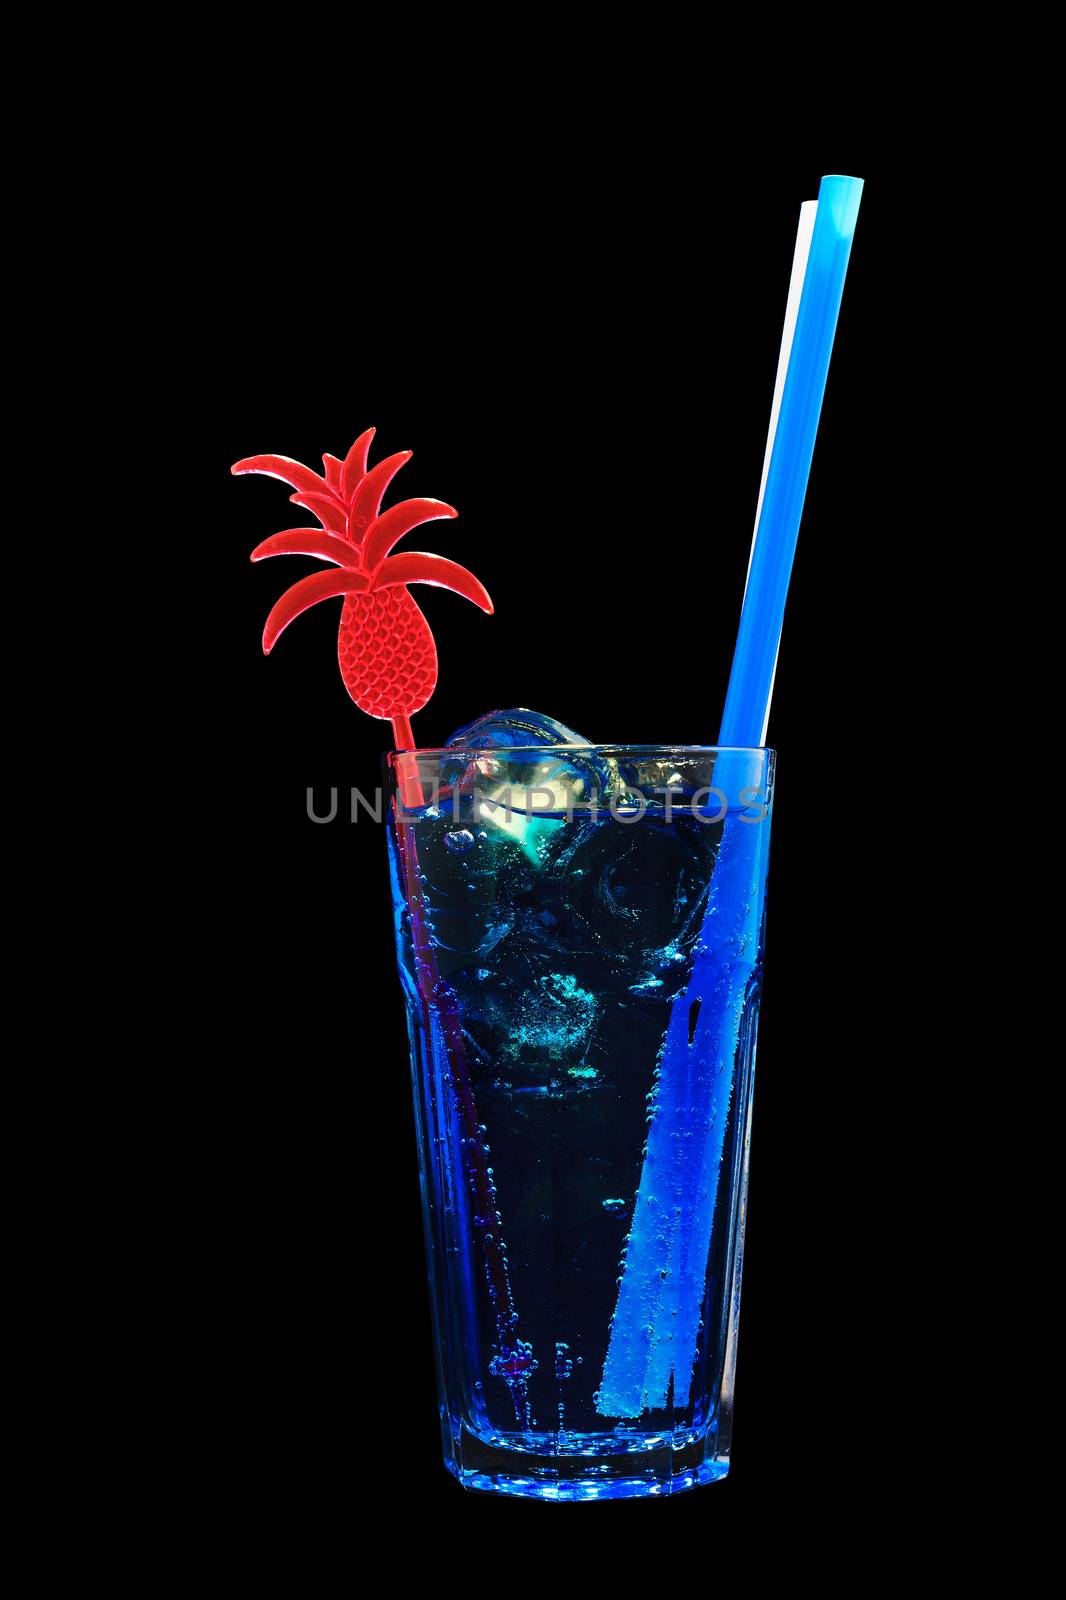 Blue drink with ice on a black background